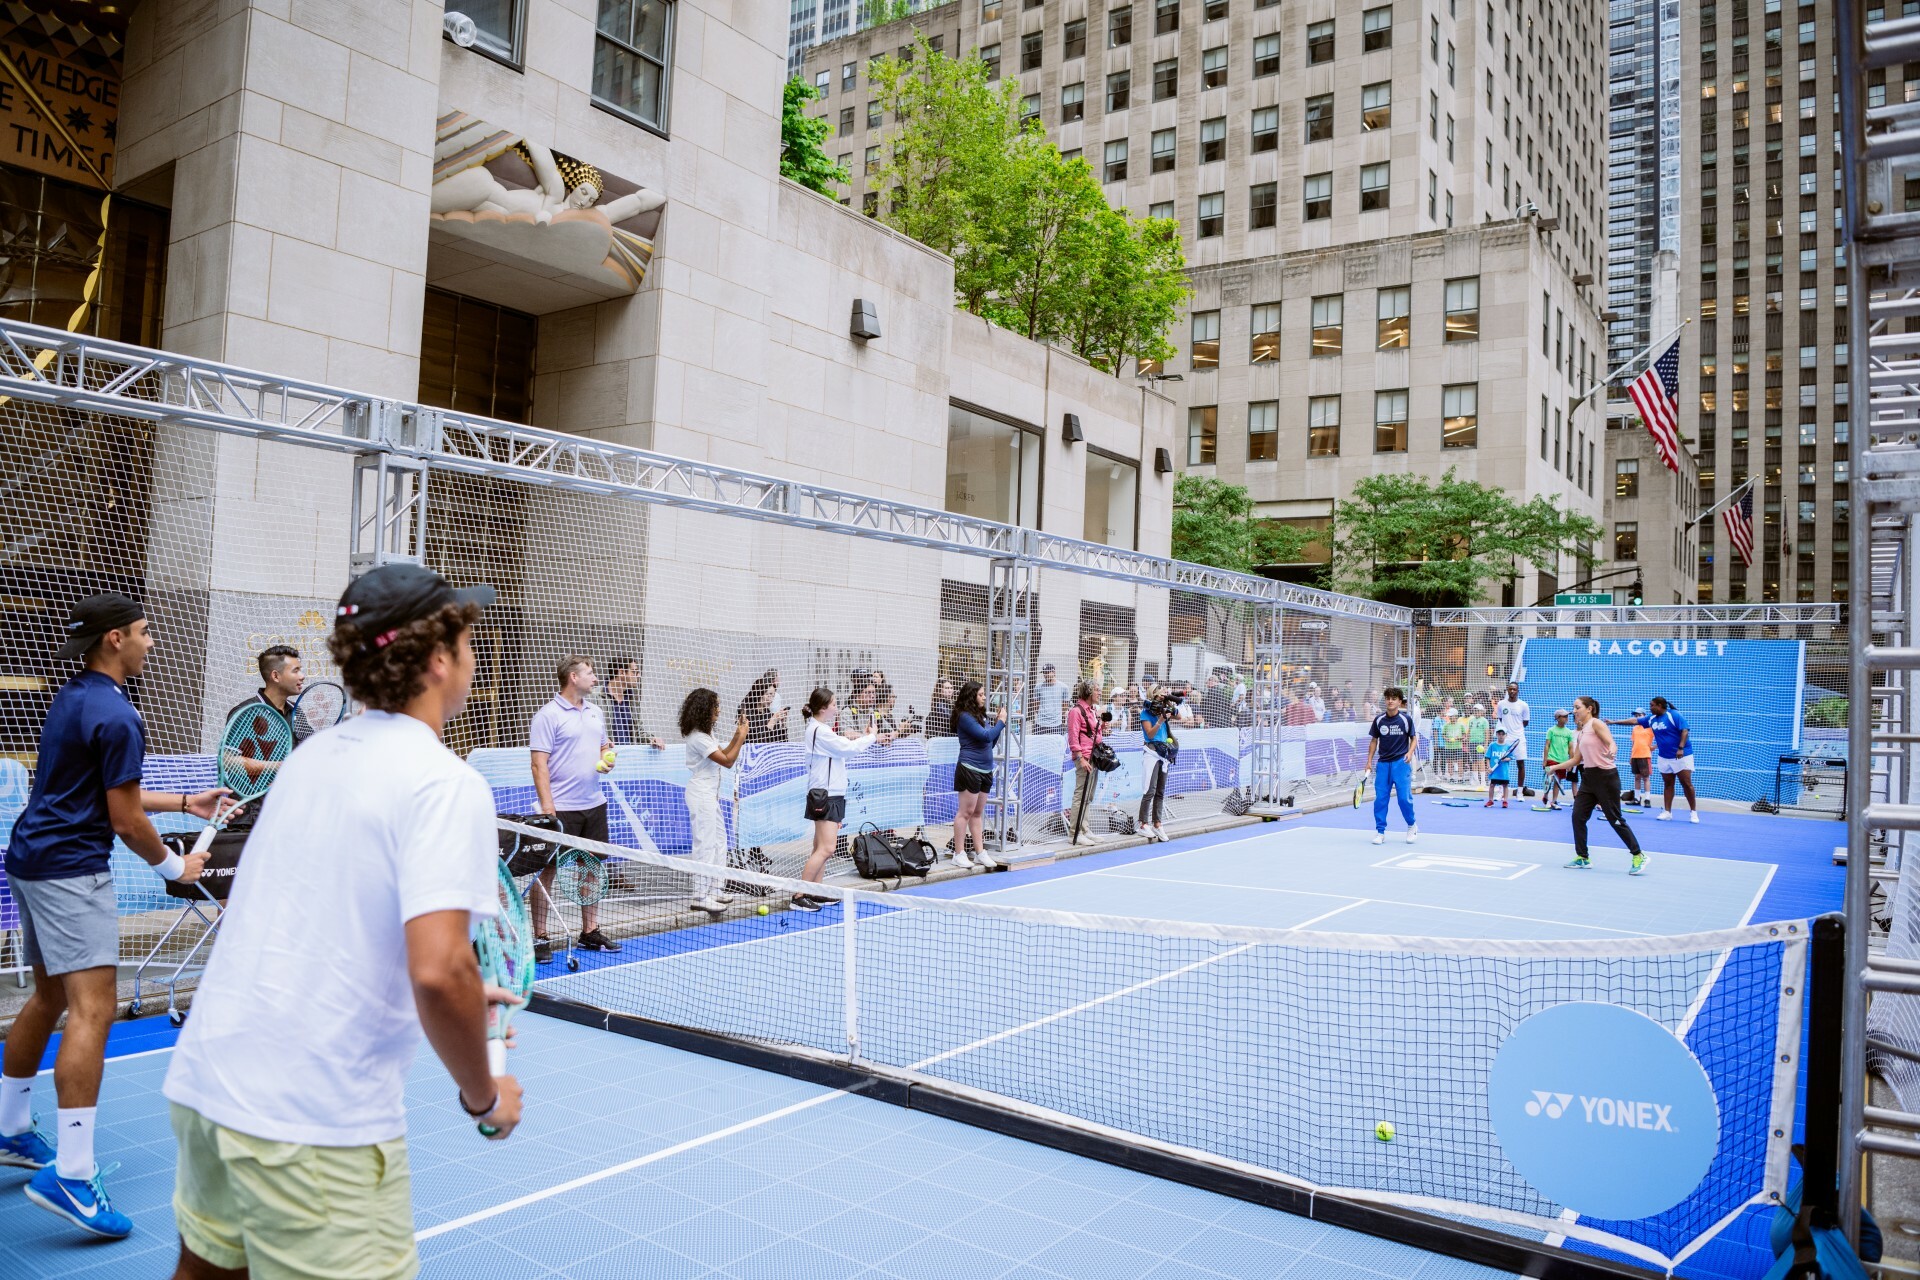 NYCs Rockefeller Center will have its own tennis court during the U.S